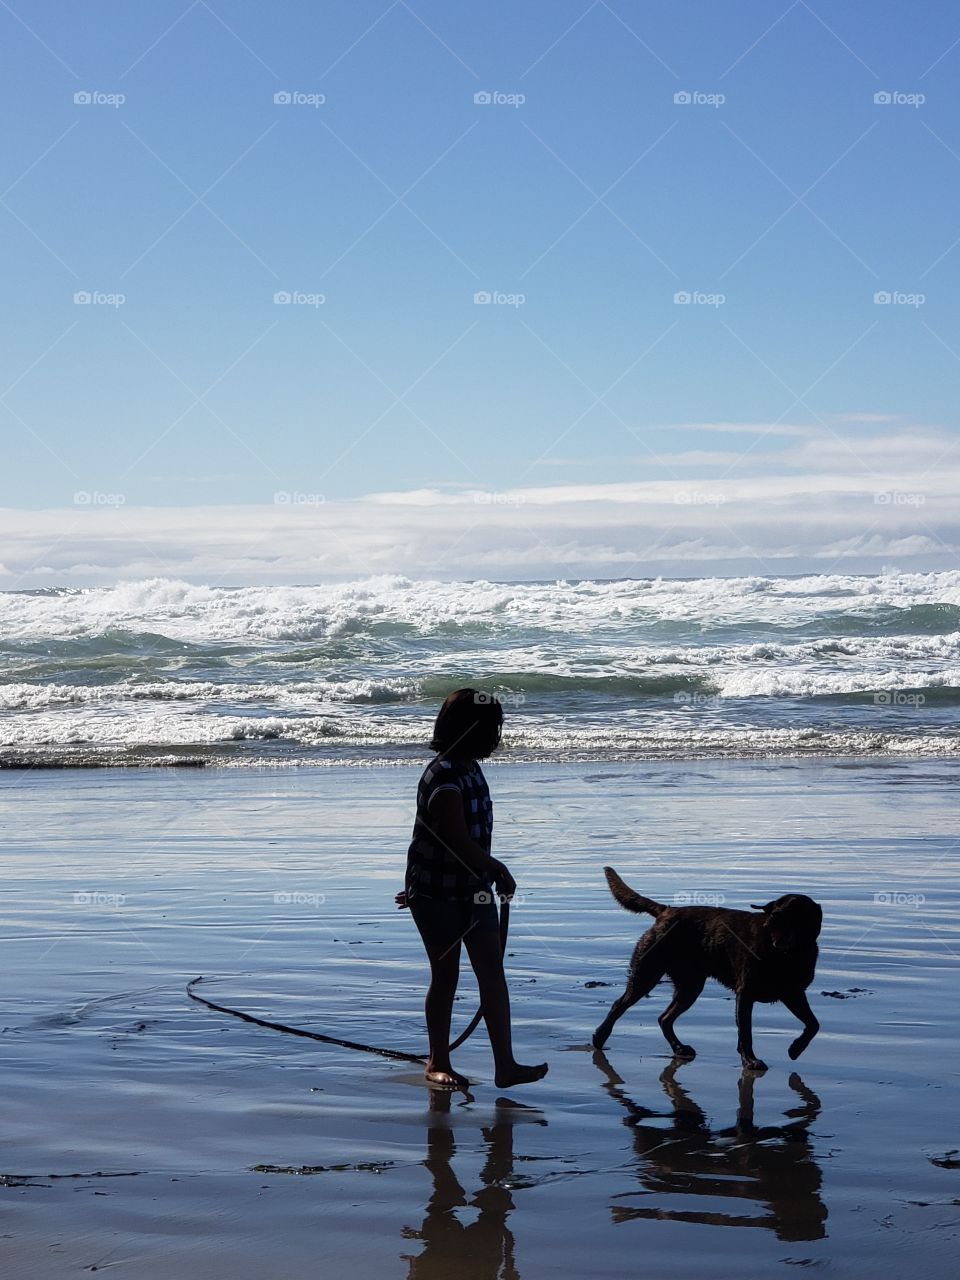 child and dog silhouette at the beach